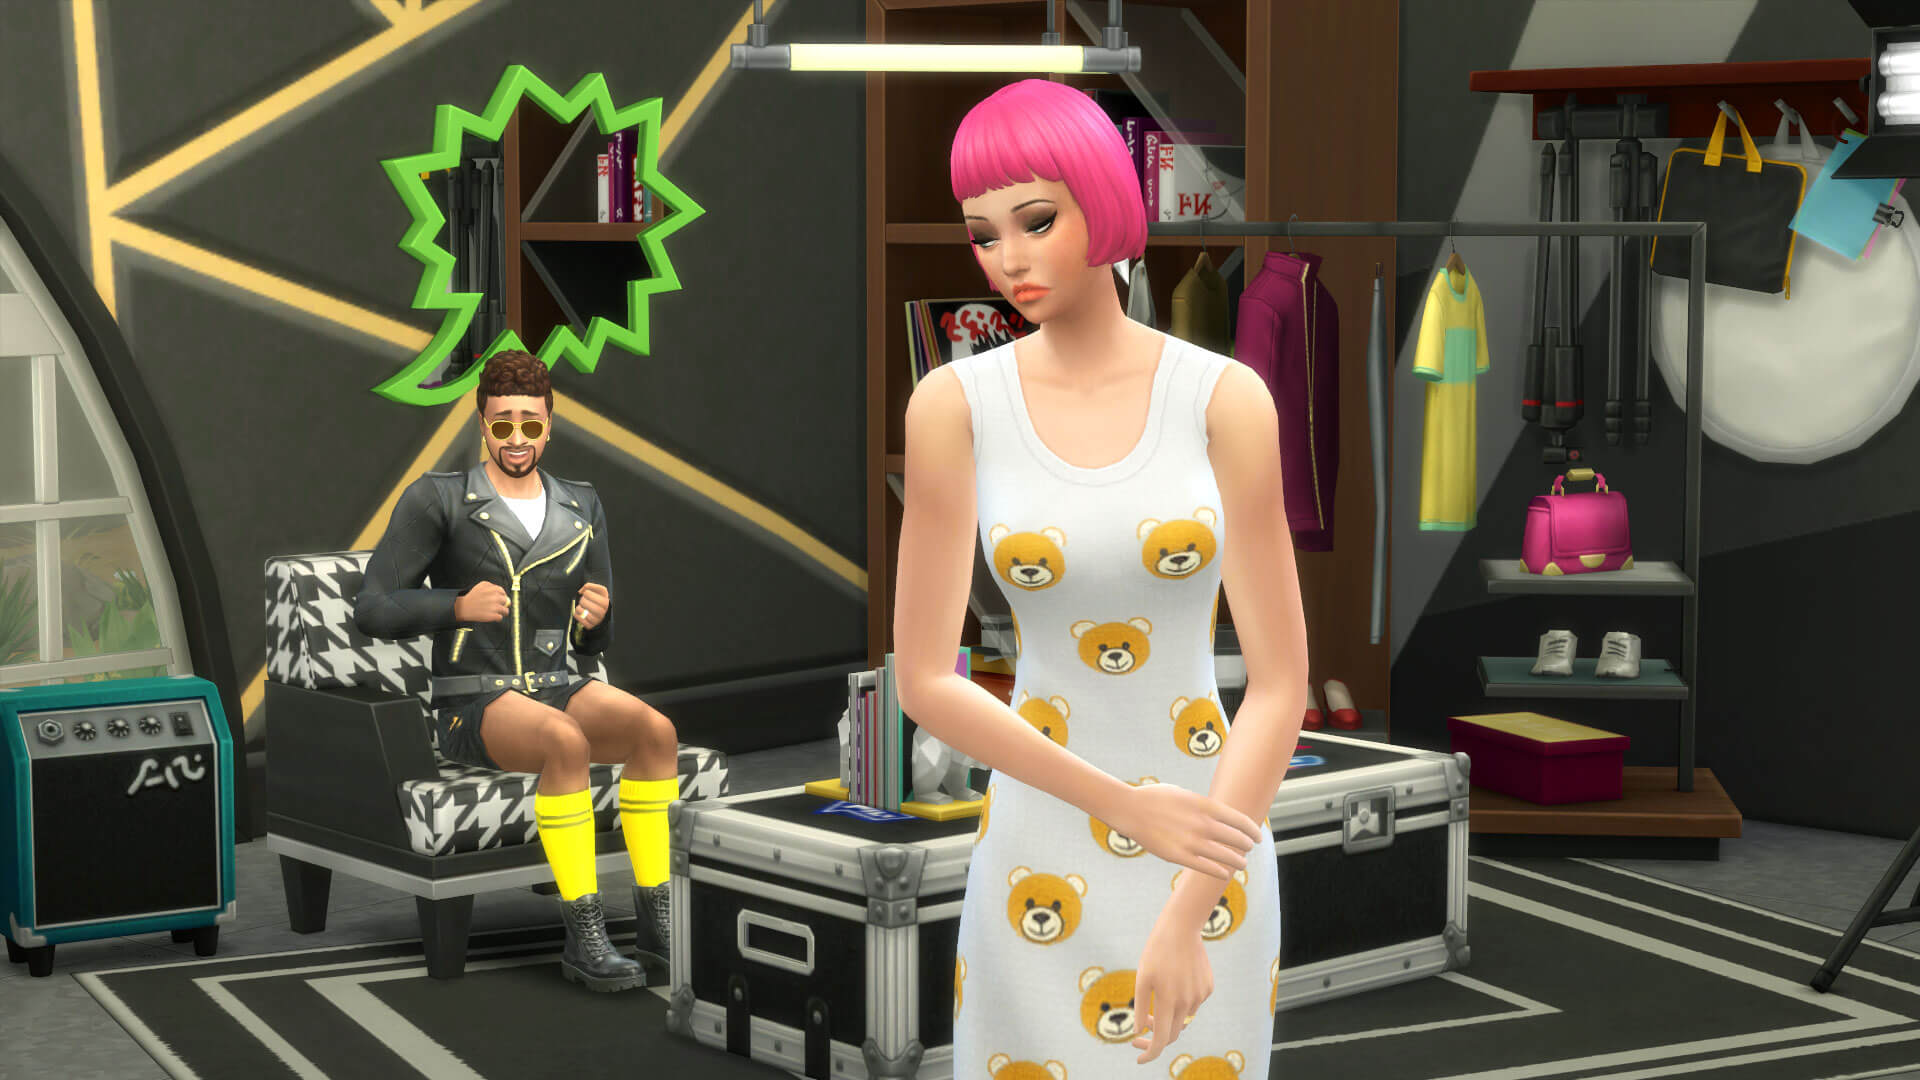 The Sims 4 Moschino stuff pack review – Platinum Simmers